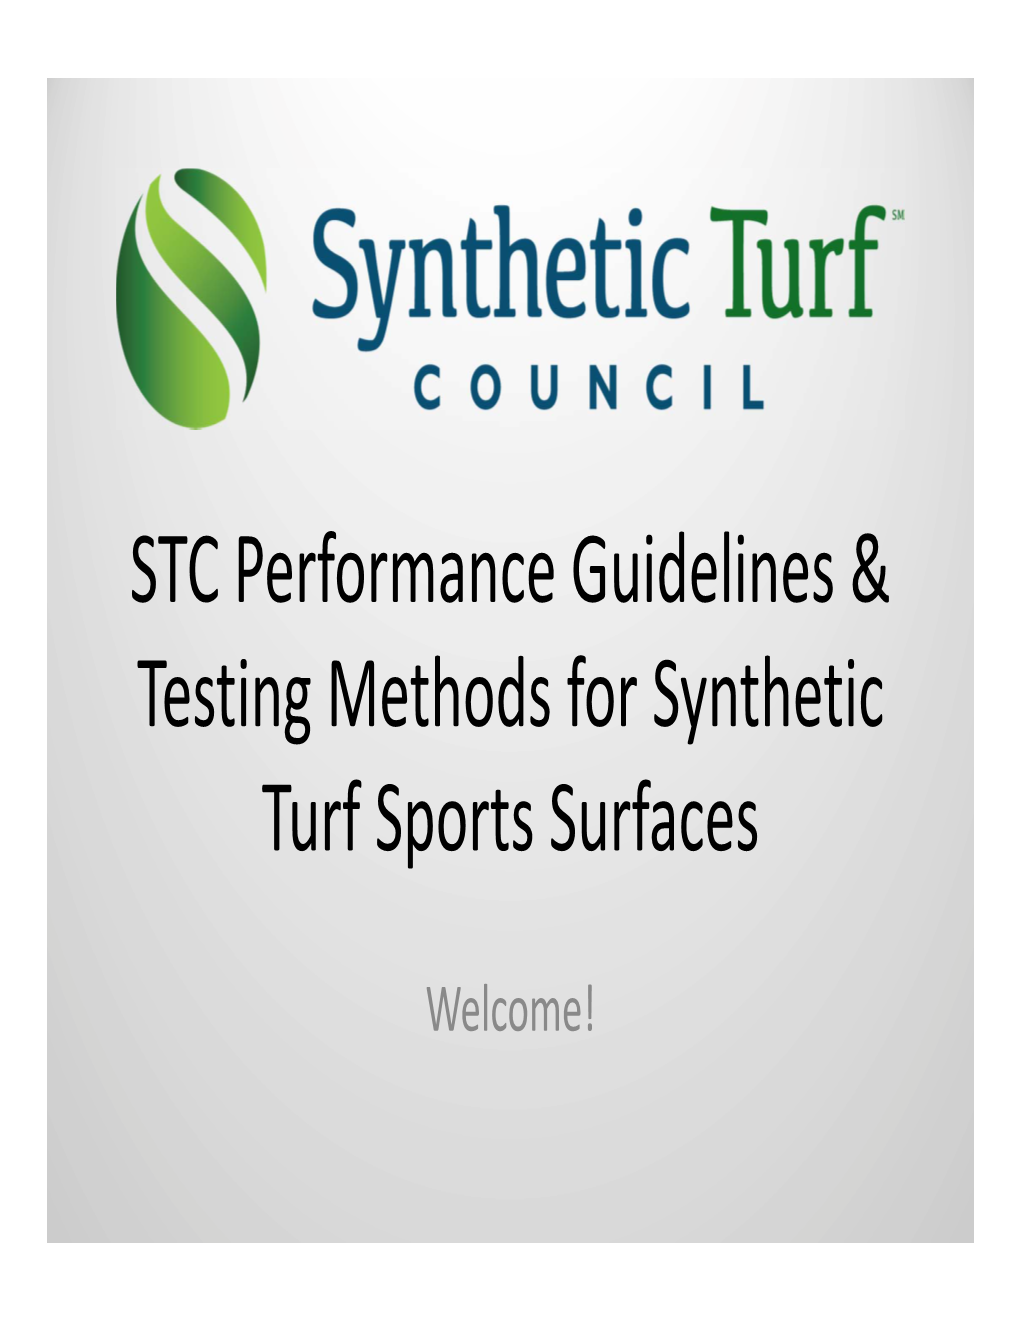 STC Performance Guidelines & Testing Methods for Synthetic Turf Sports Surfaces